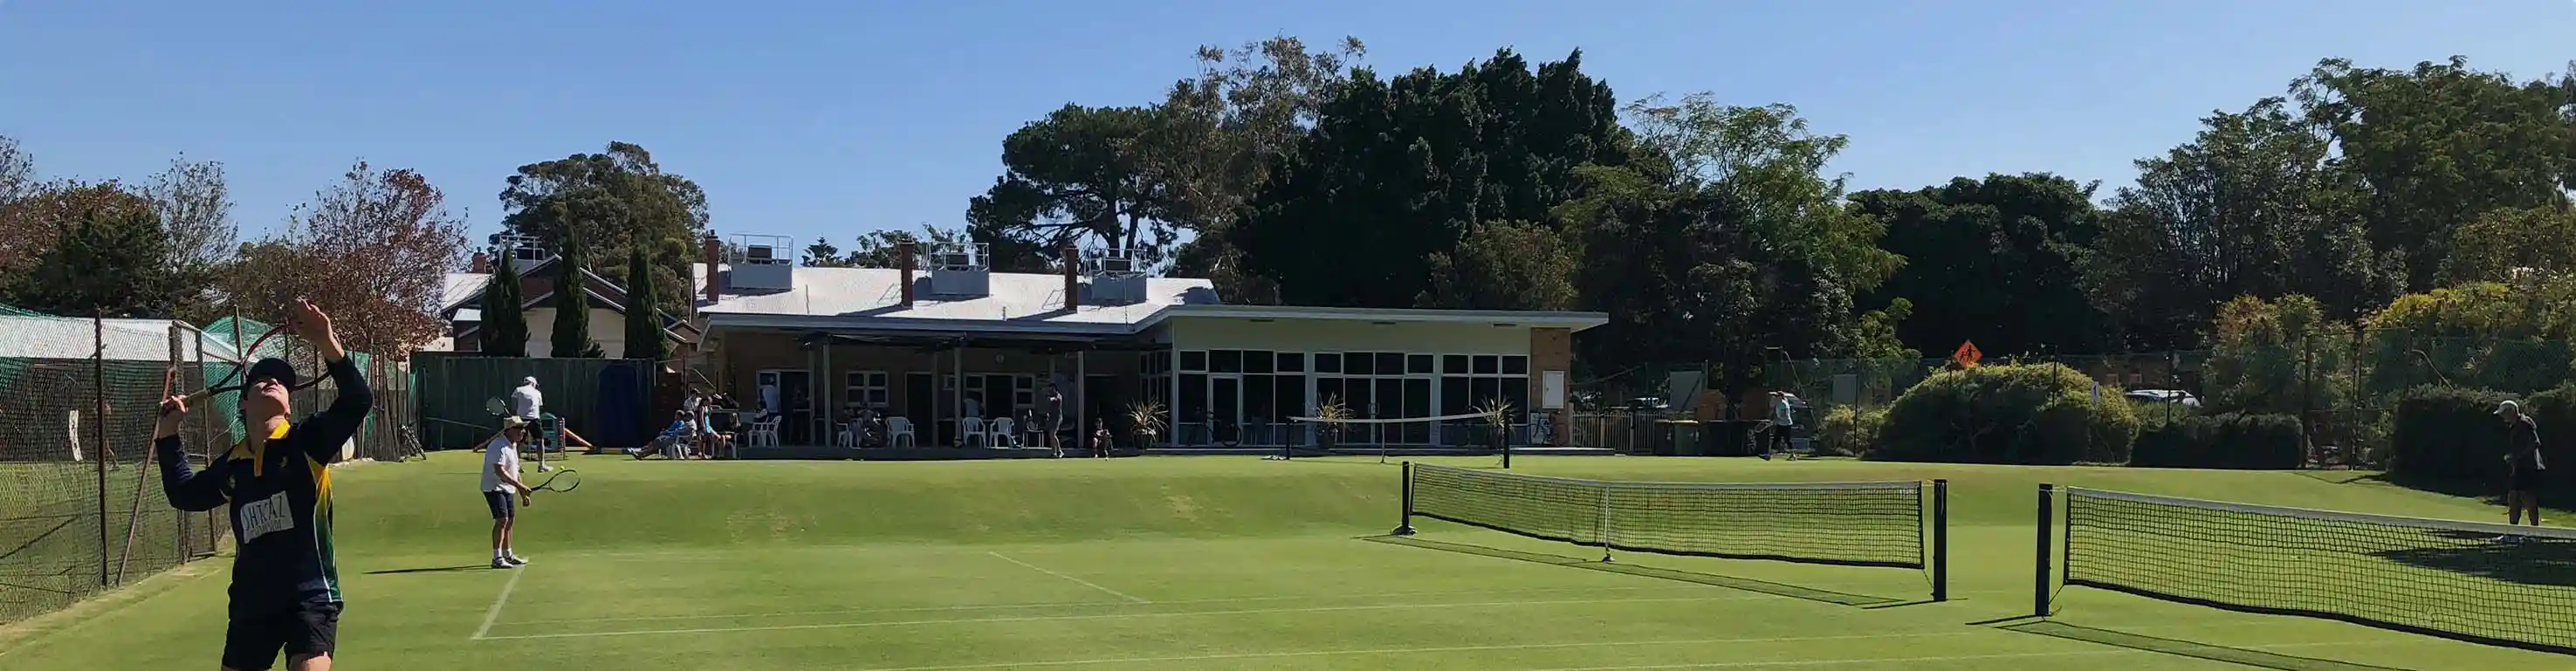 OPTC grass courts with clubhouse in background